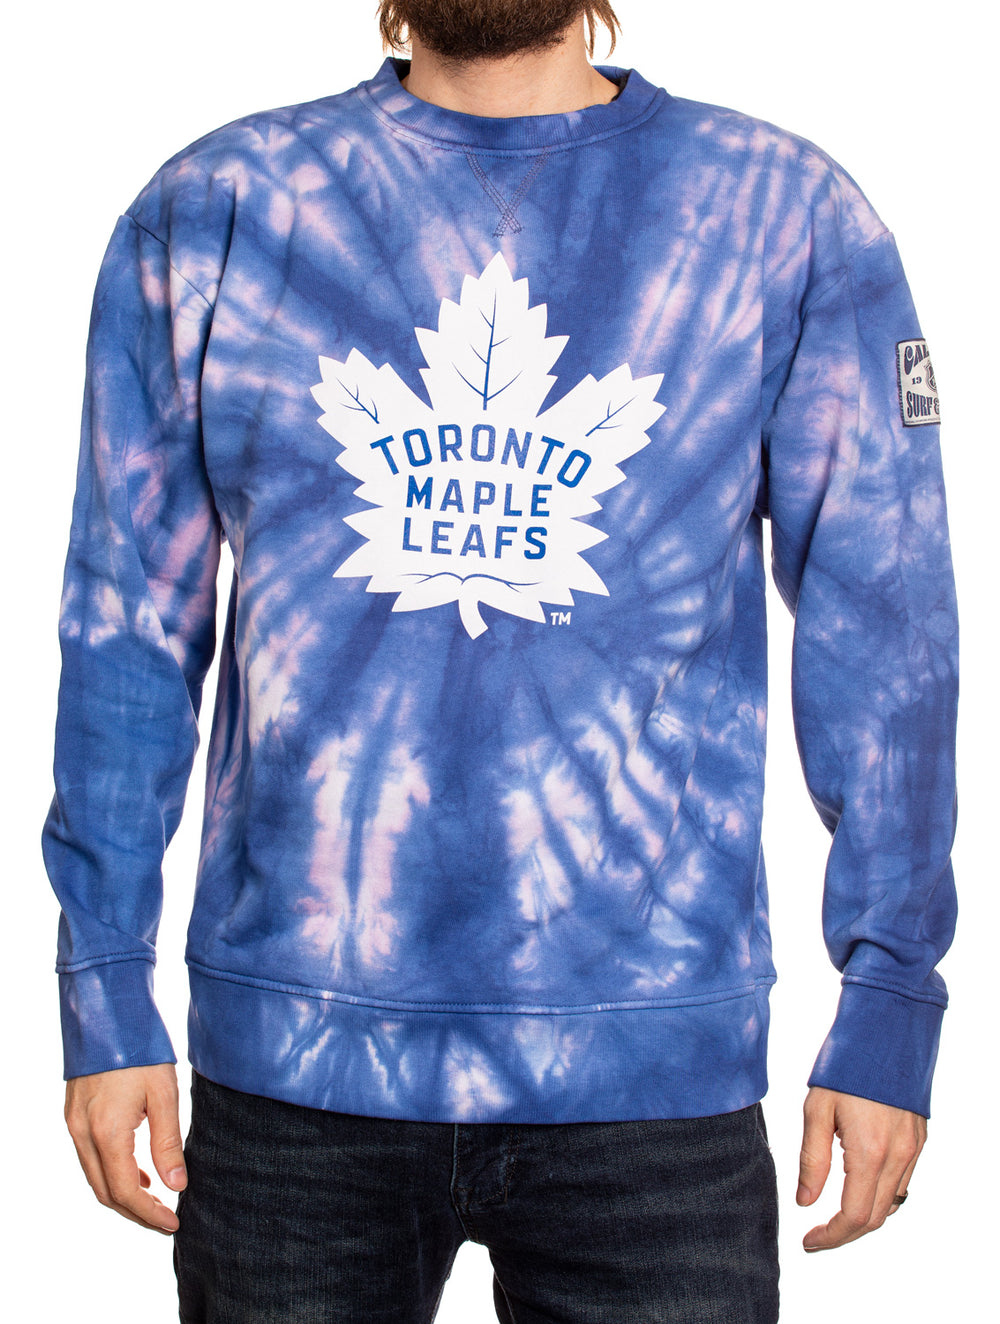 Toronto Maple Leafs Long Sleeve size M (20x25.5) for $30 available now!  #whatsgoodvintage